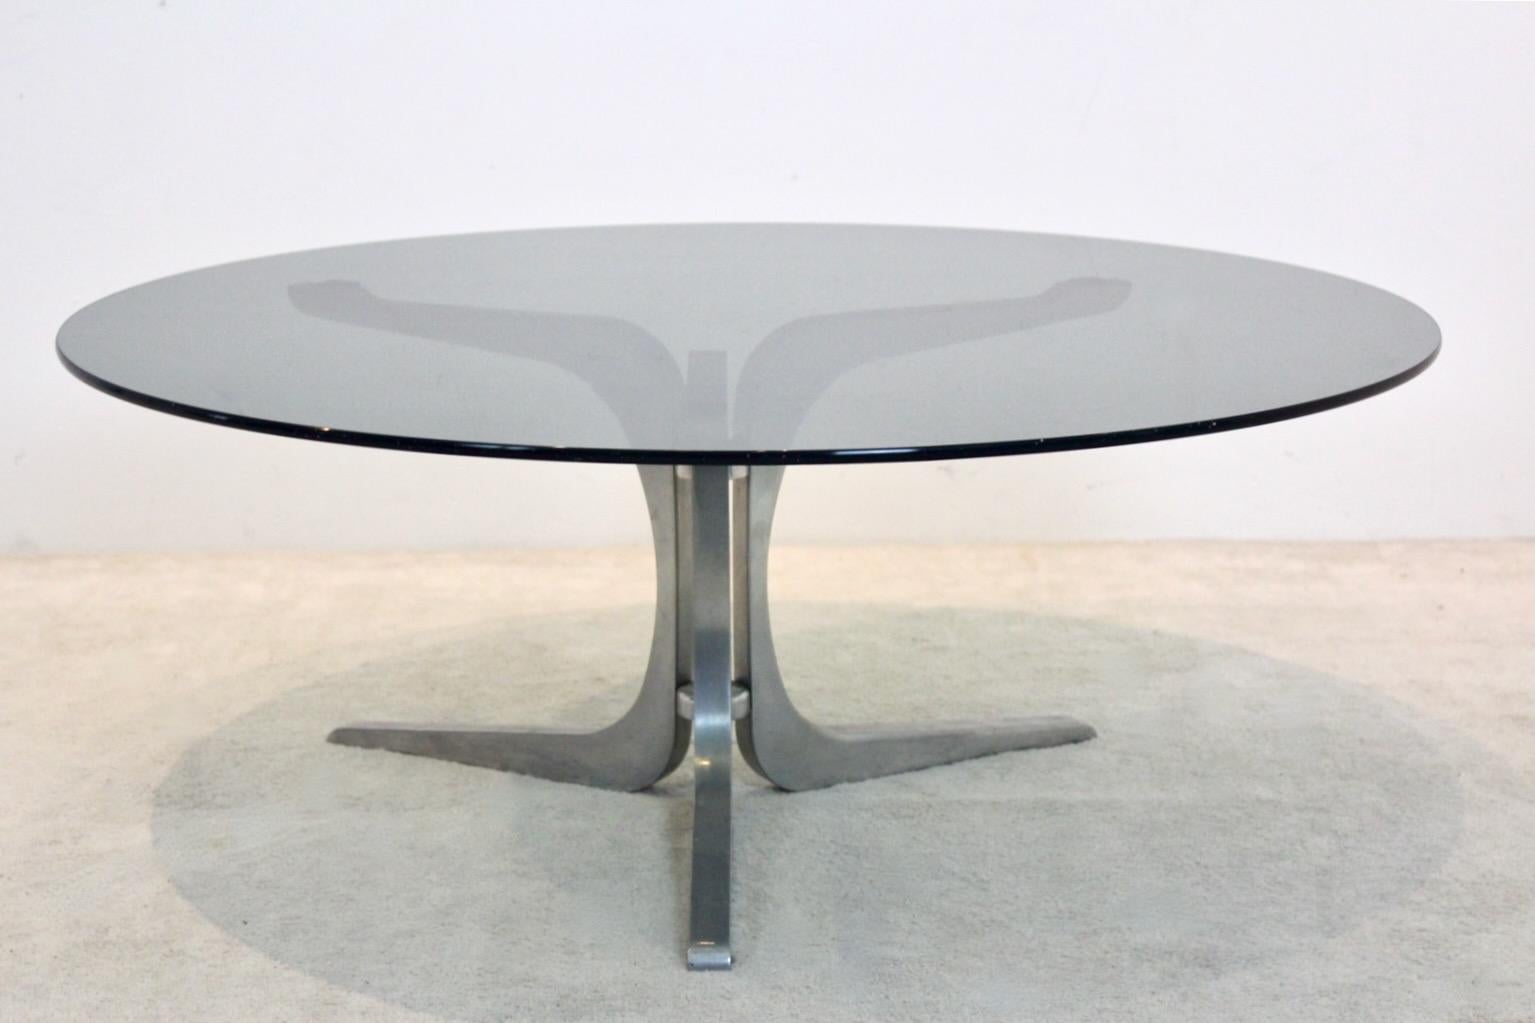 Sophisticated and original Round Coffee table designed by Geoffrey Harcourt for Artifort furniture in the Netherlands. With a smoked glass top and aluminum base with sculptural structure. Normal wear due to age and use, however in good condition. A